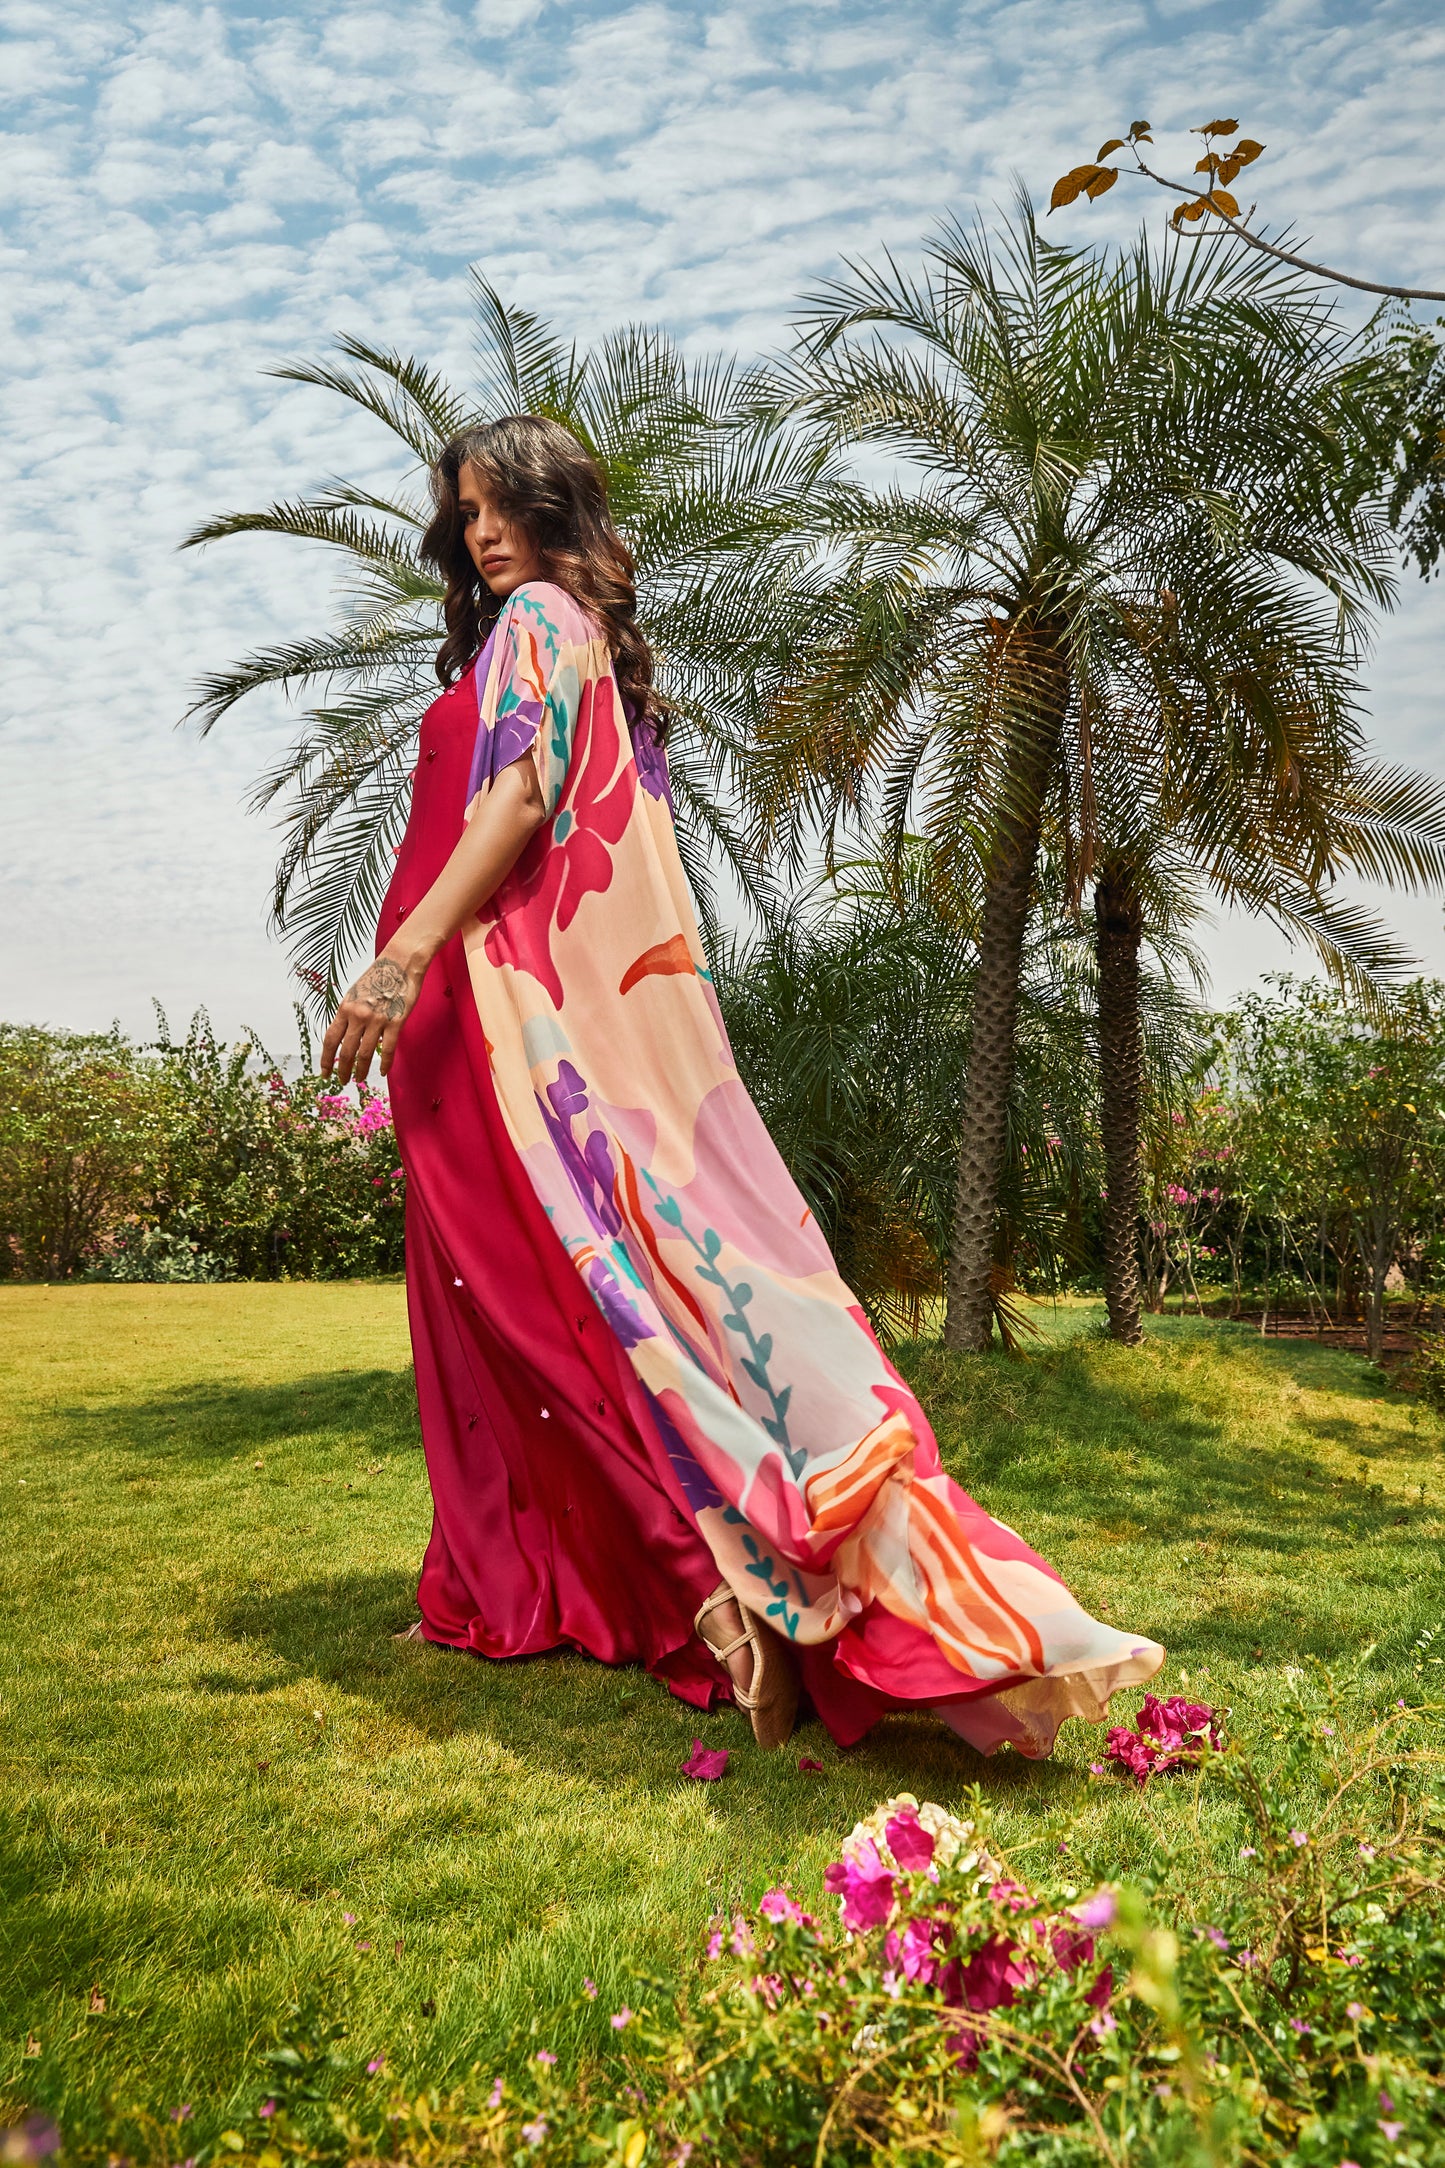 Foral printed cape paired with cerise pink bias dress.